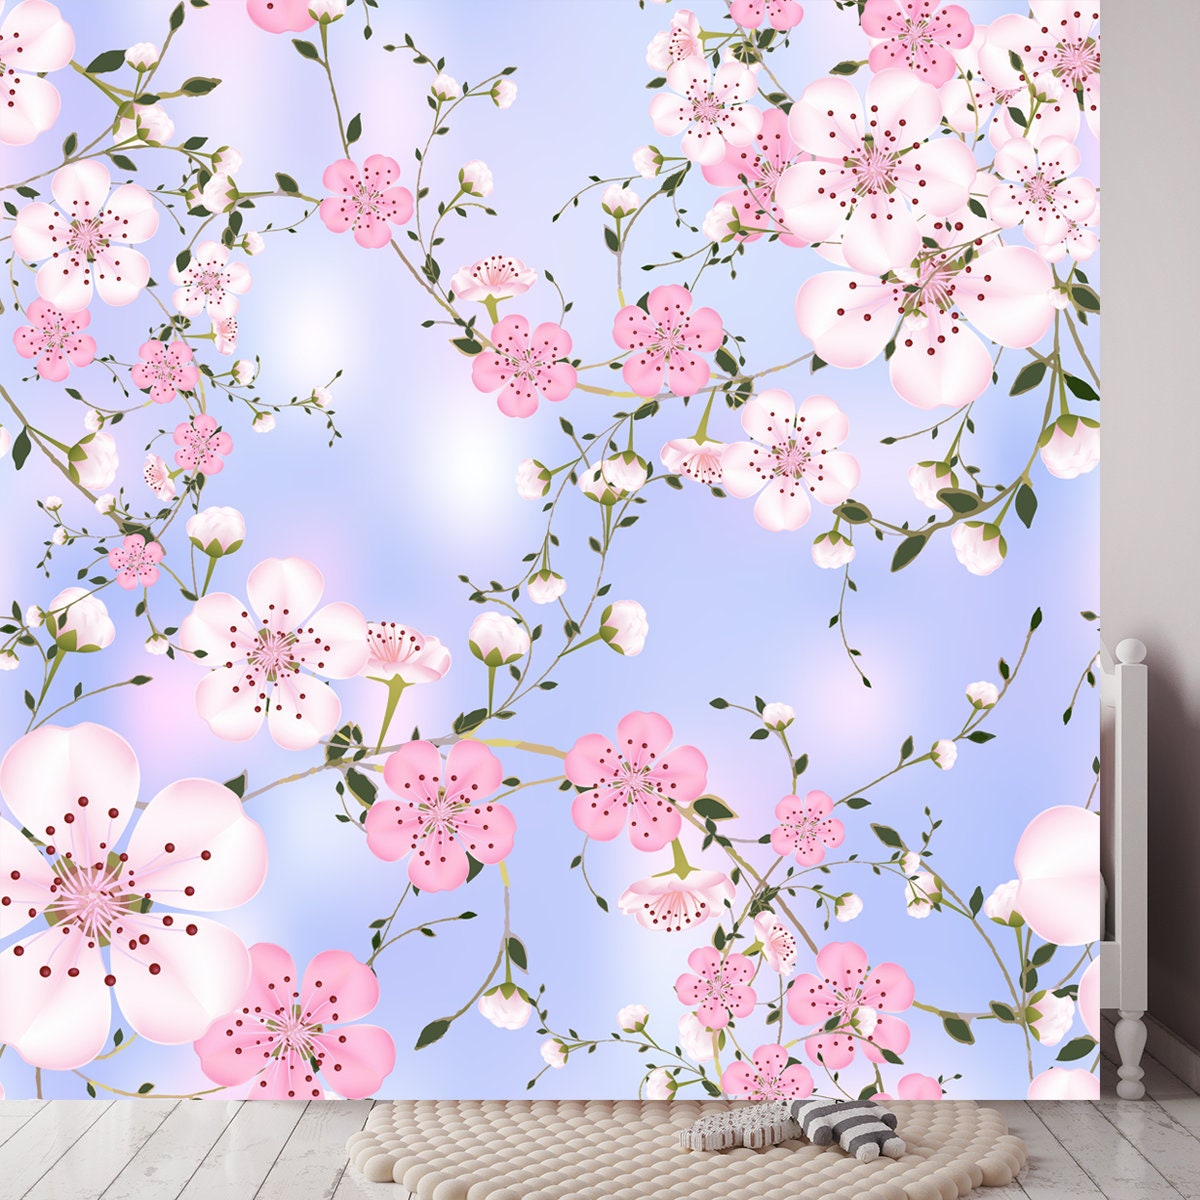 Blossoming Branches of Japanese Cherry on Blue Abstract Background in a Random Arrangement Wallpaper Girl Bedroom Mural